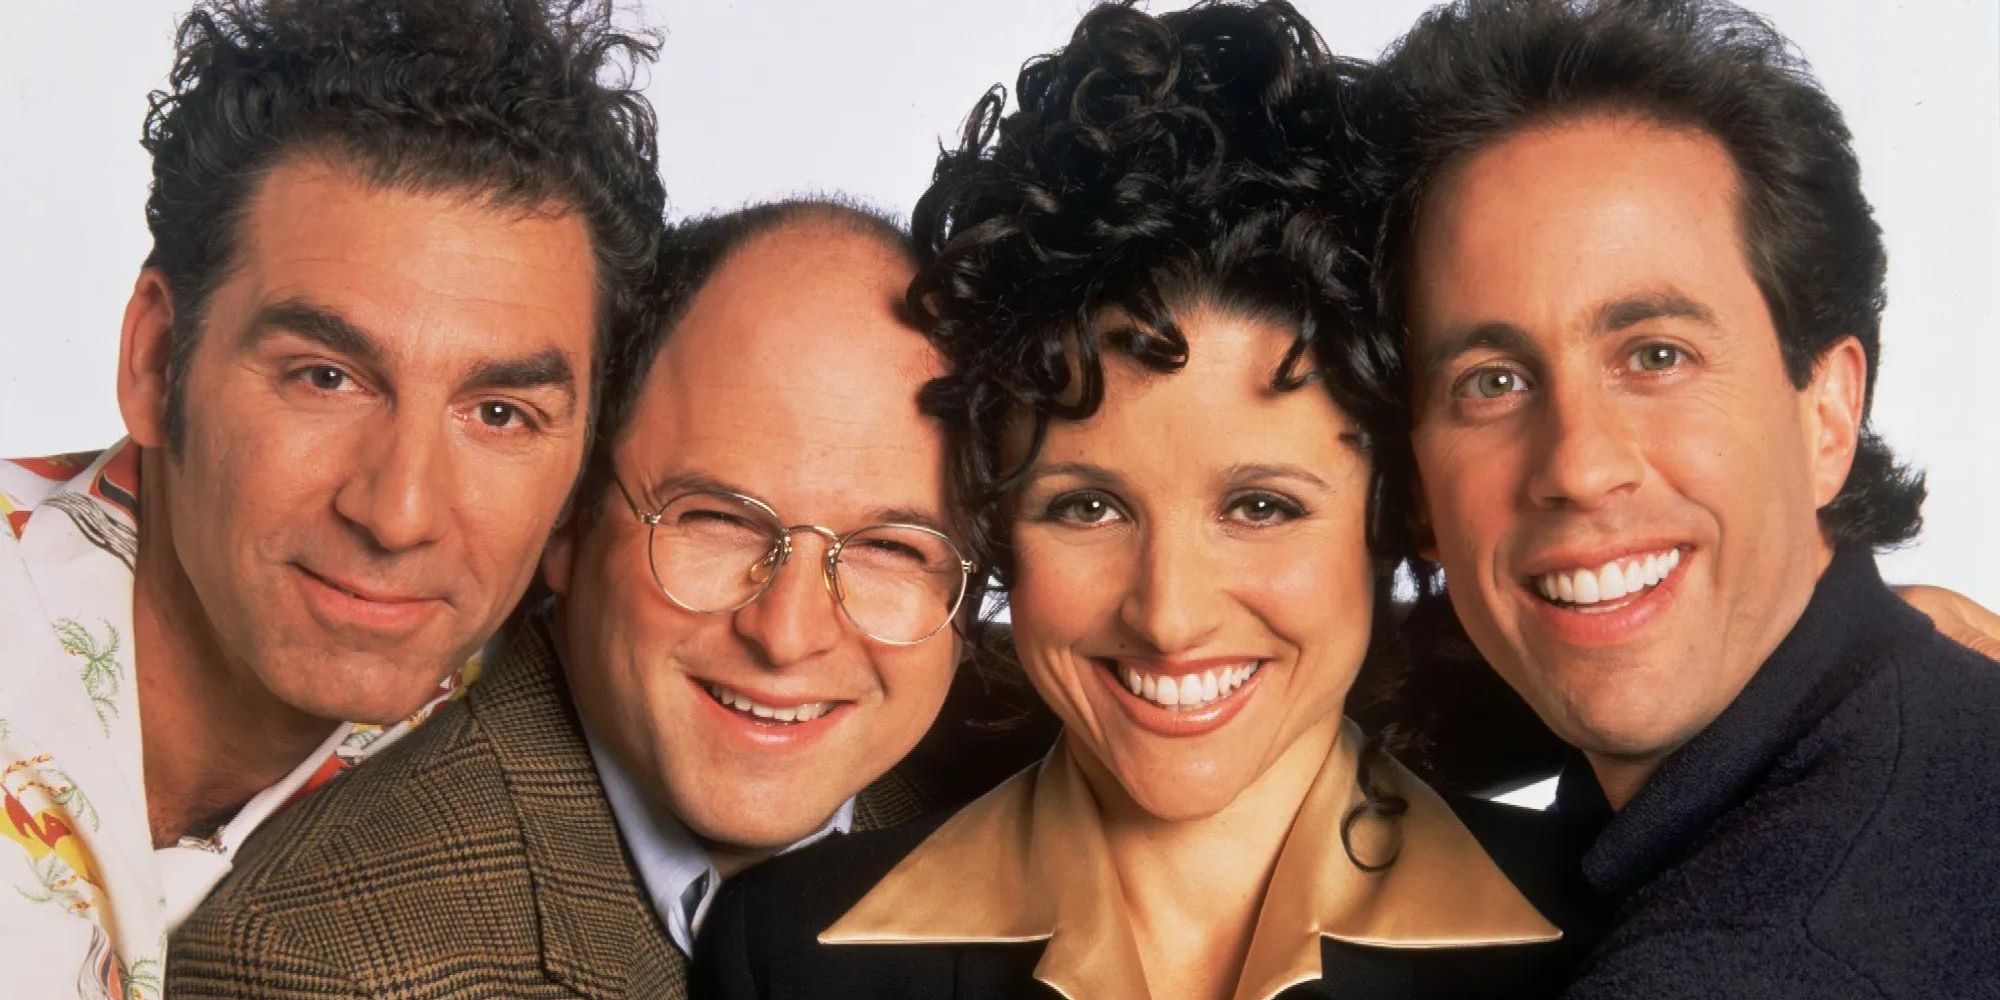 The cast of Seinfeld standing together